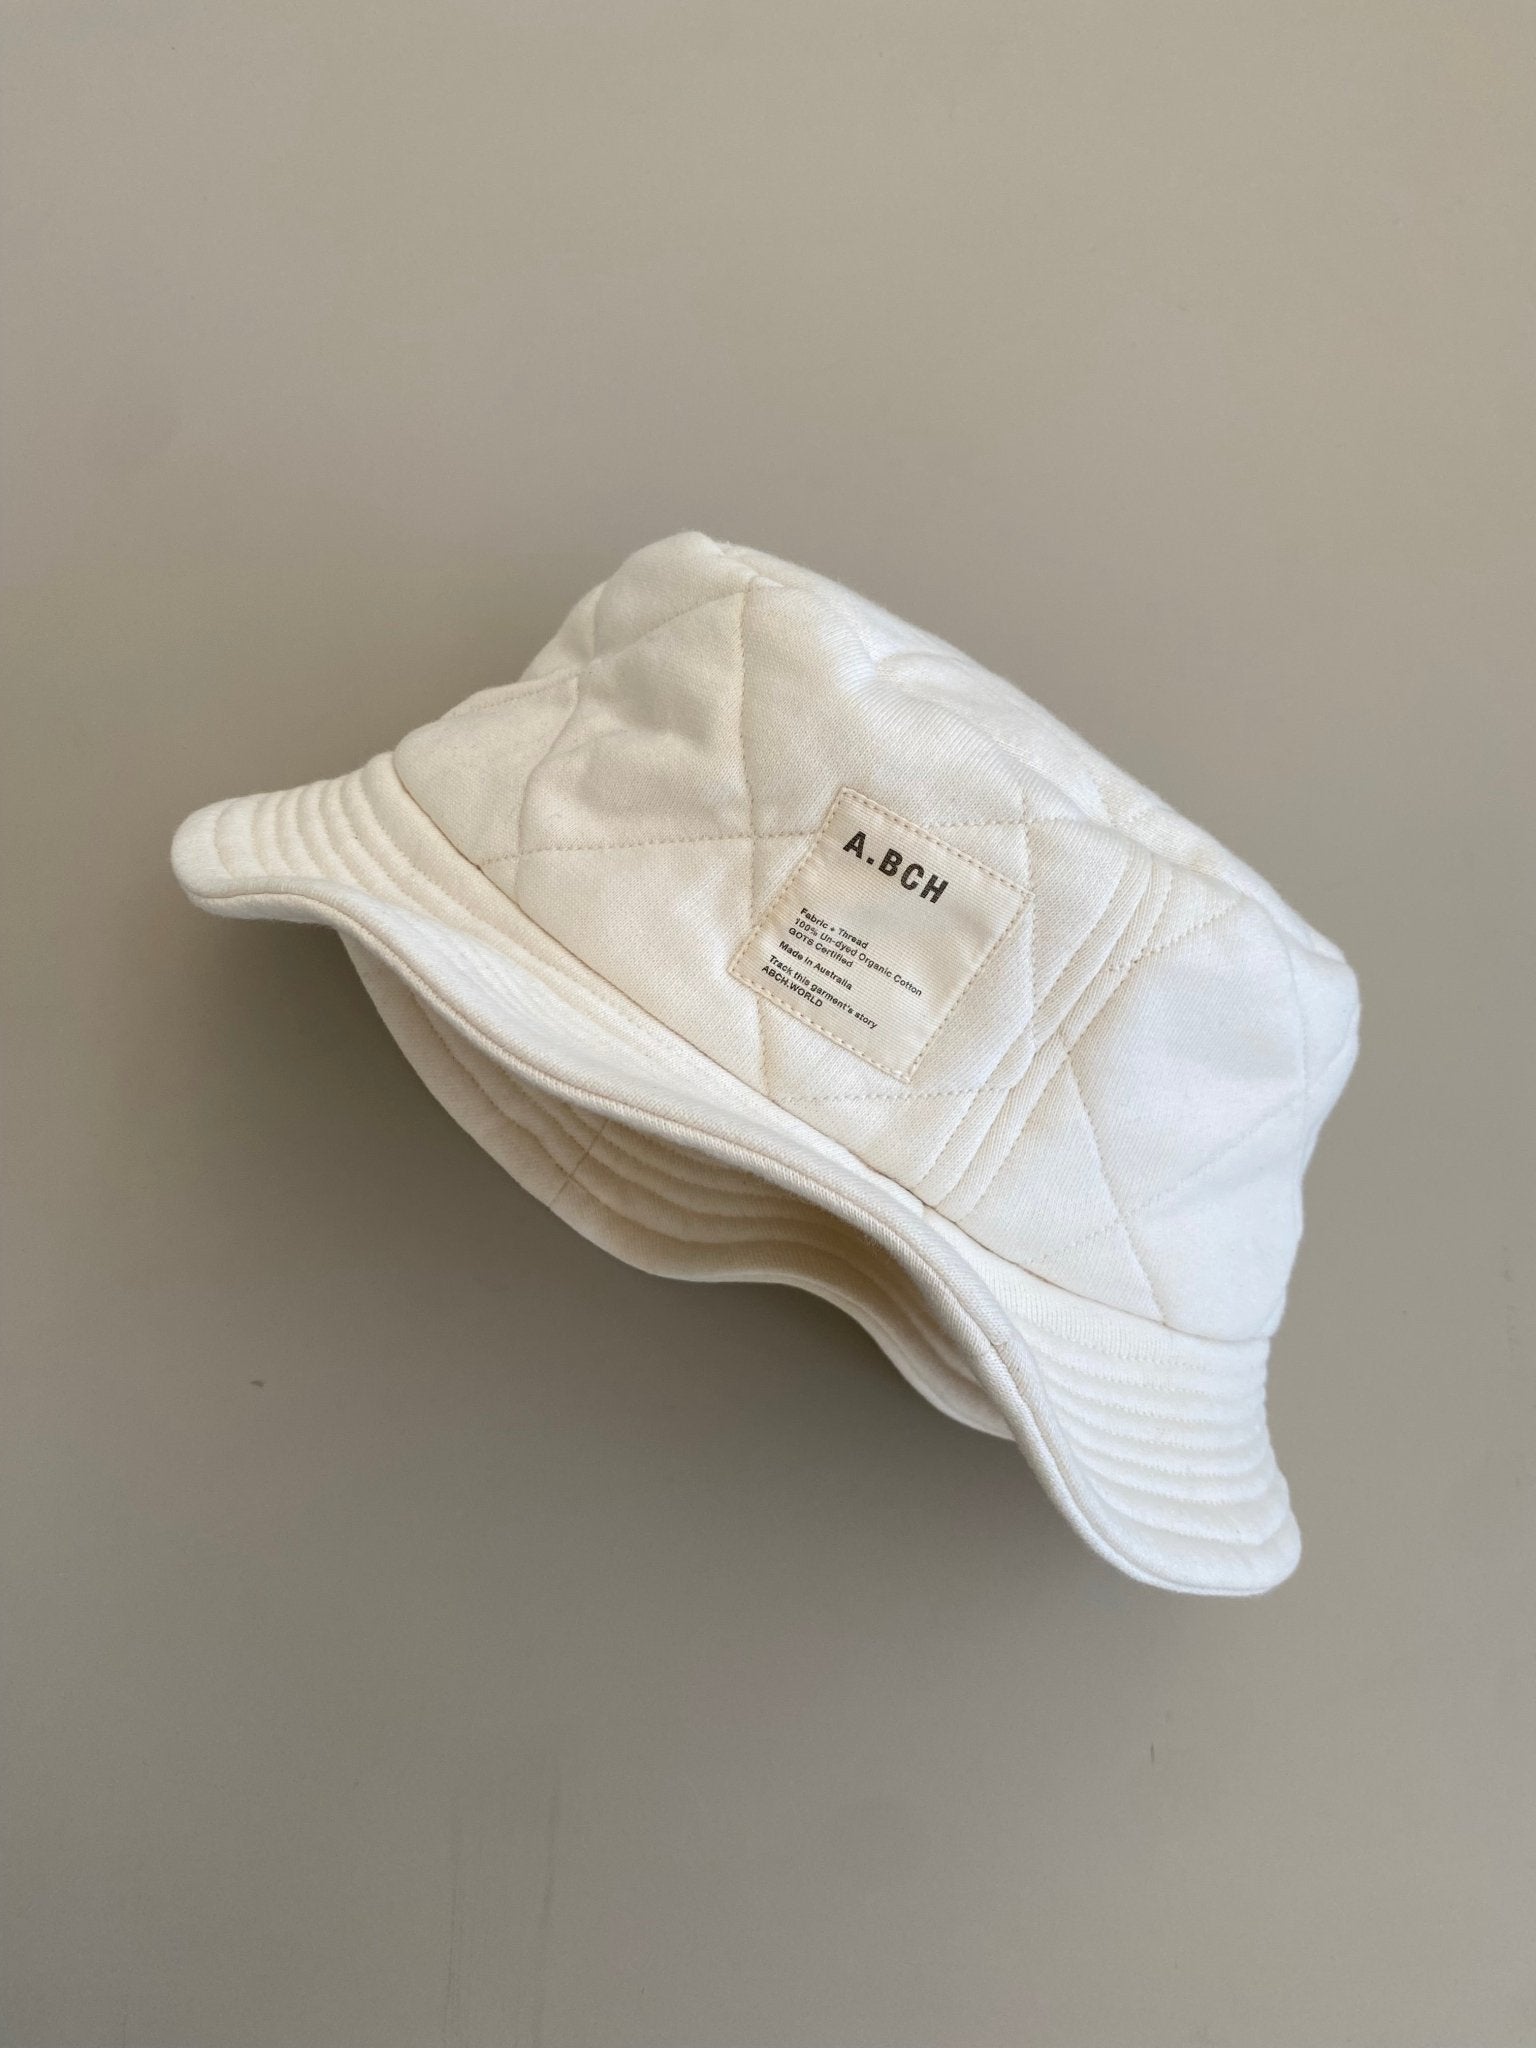 A.QBH Undyed Quilted Bucket Hat